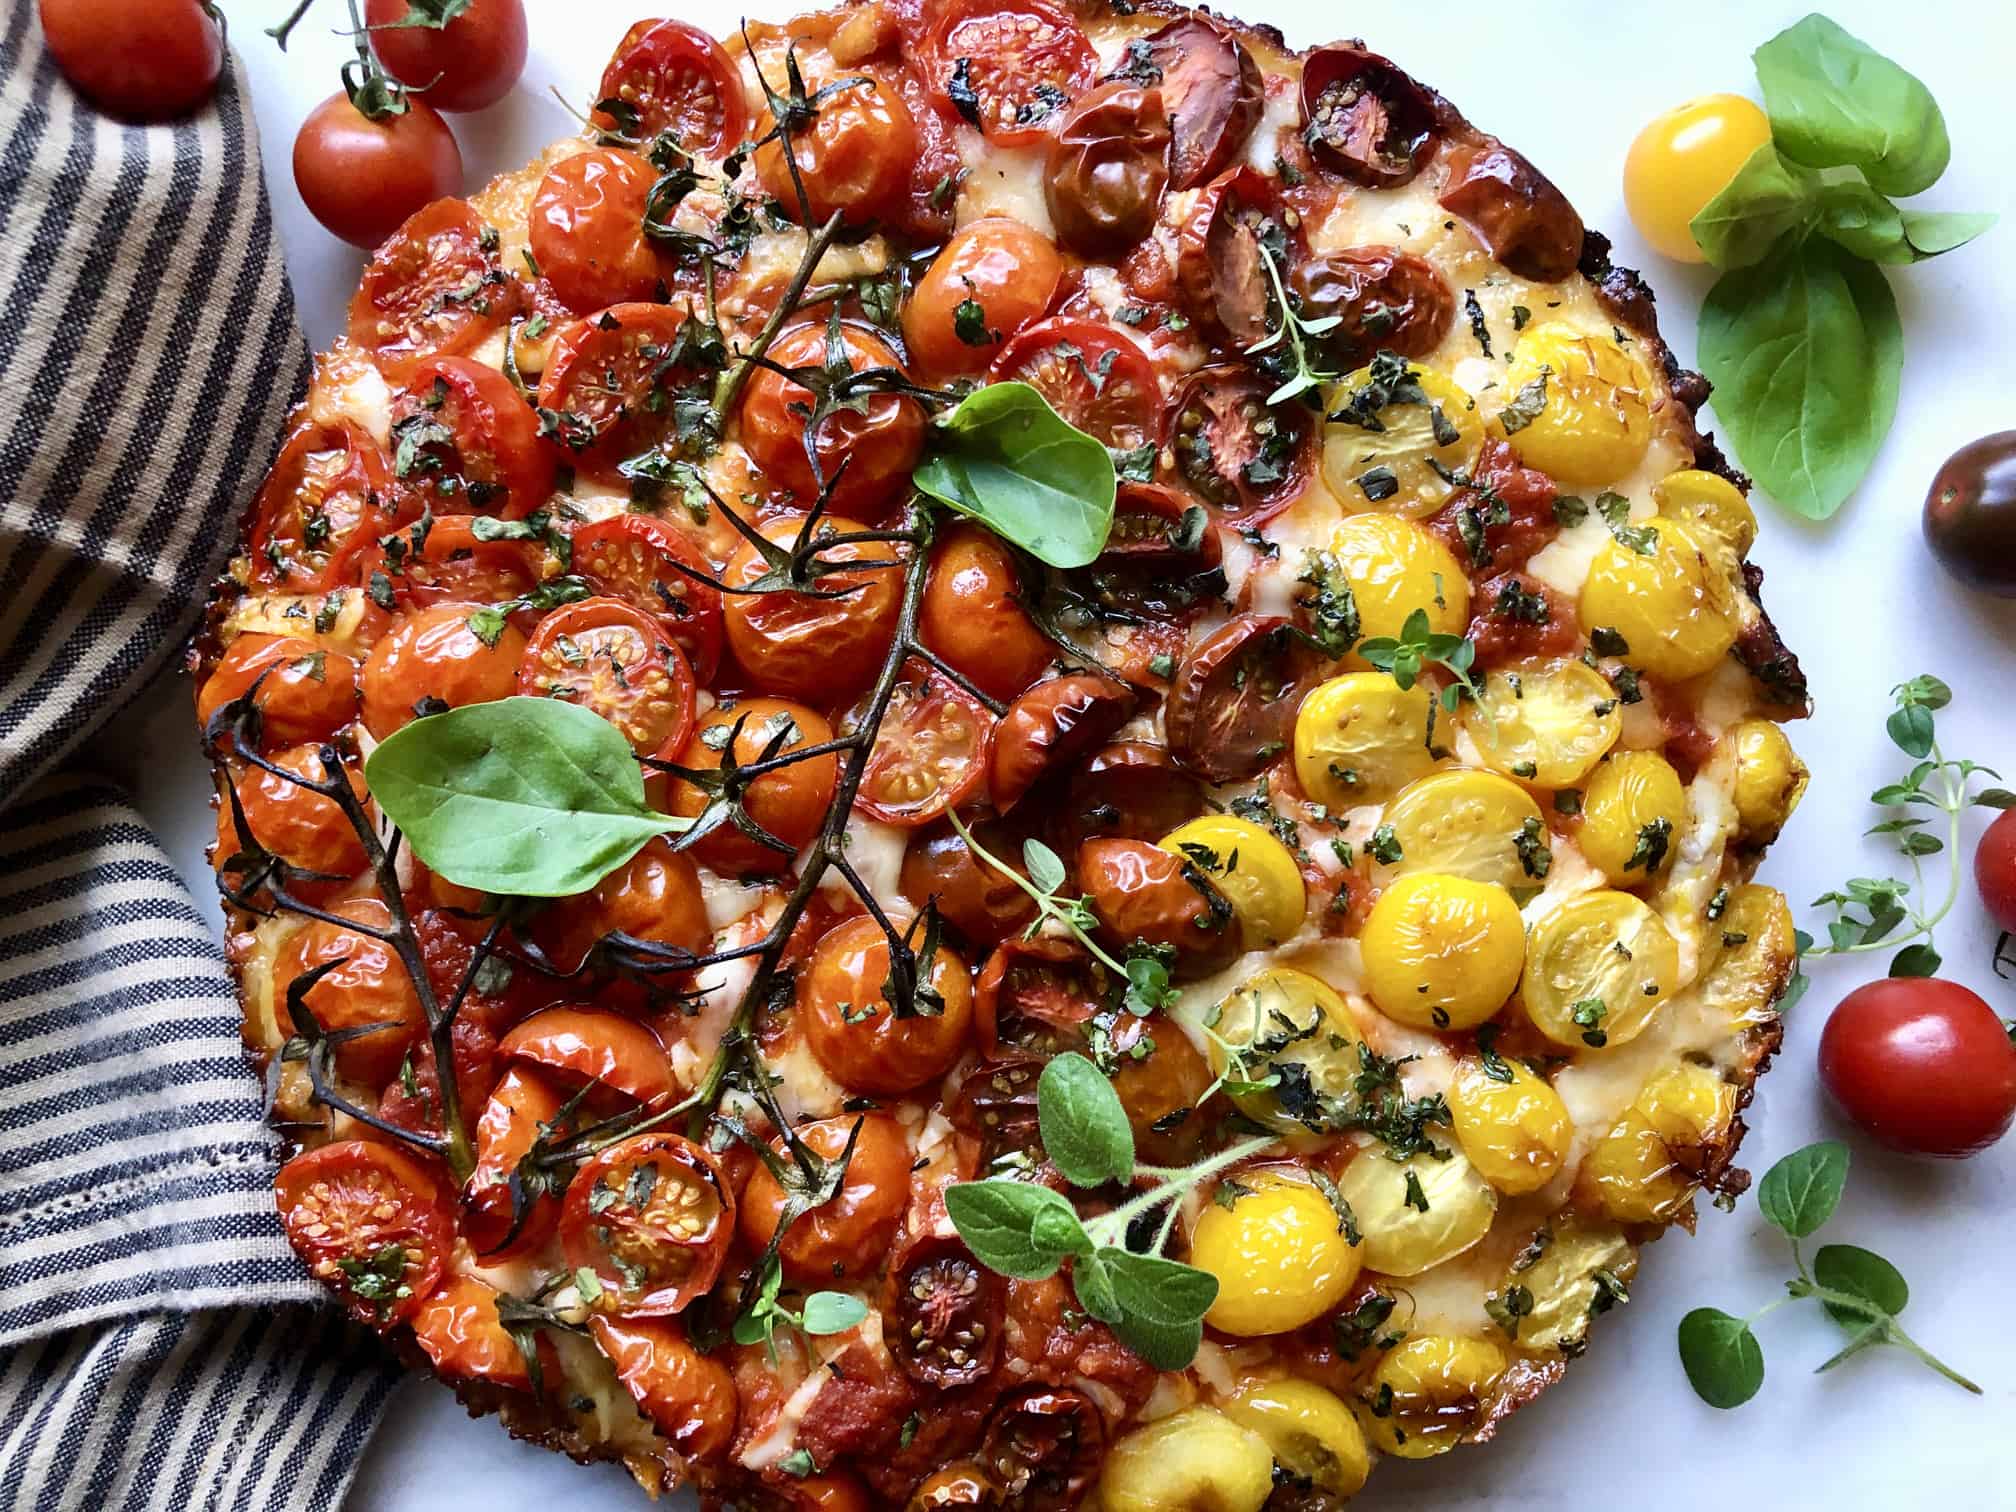 loaded with tomatoes cast iron pizza - a hint of rosemary